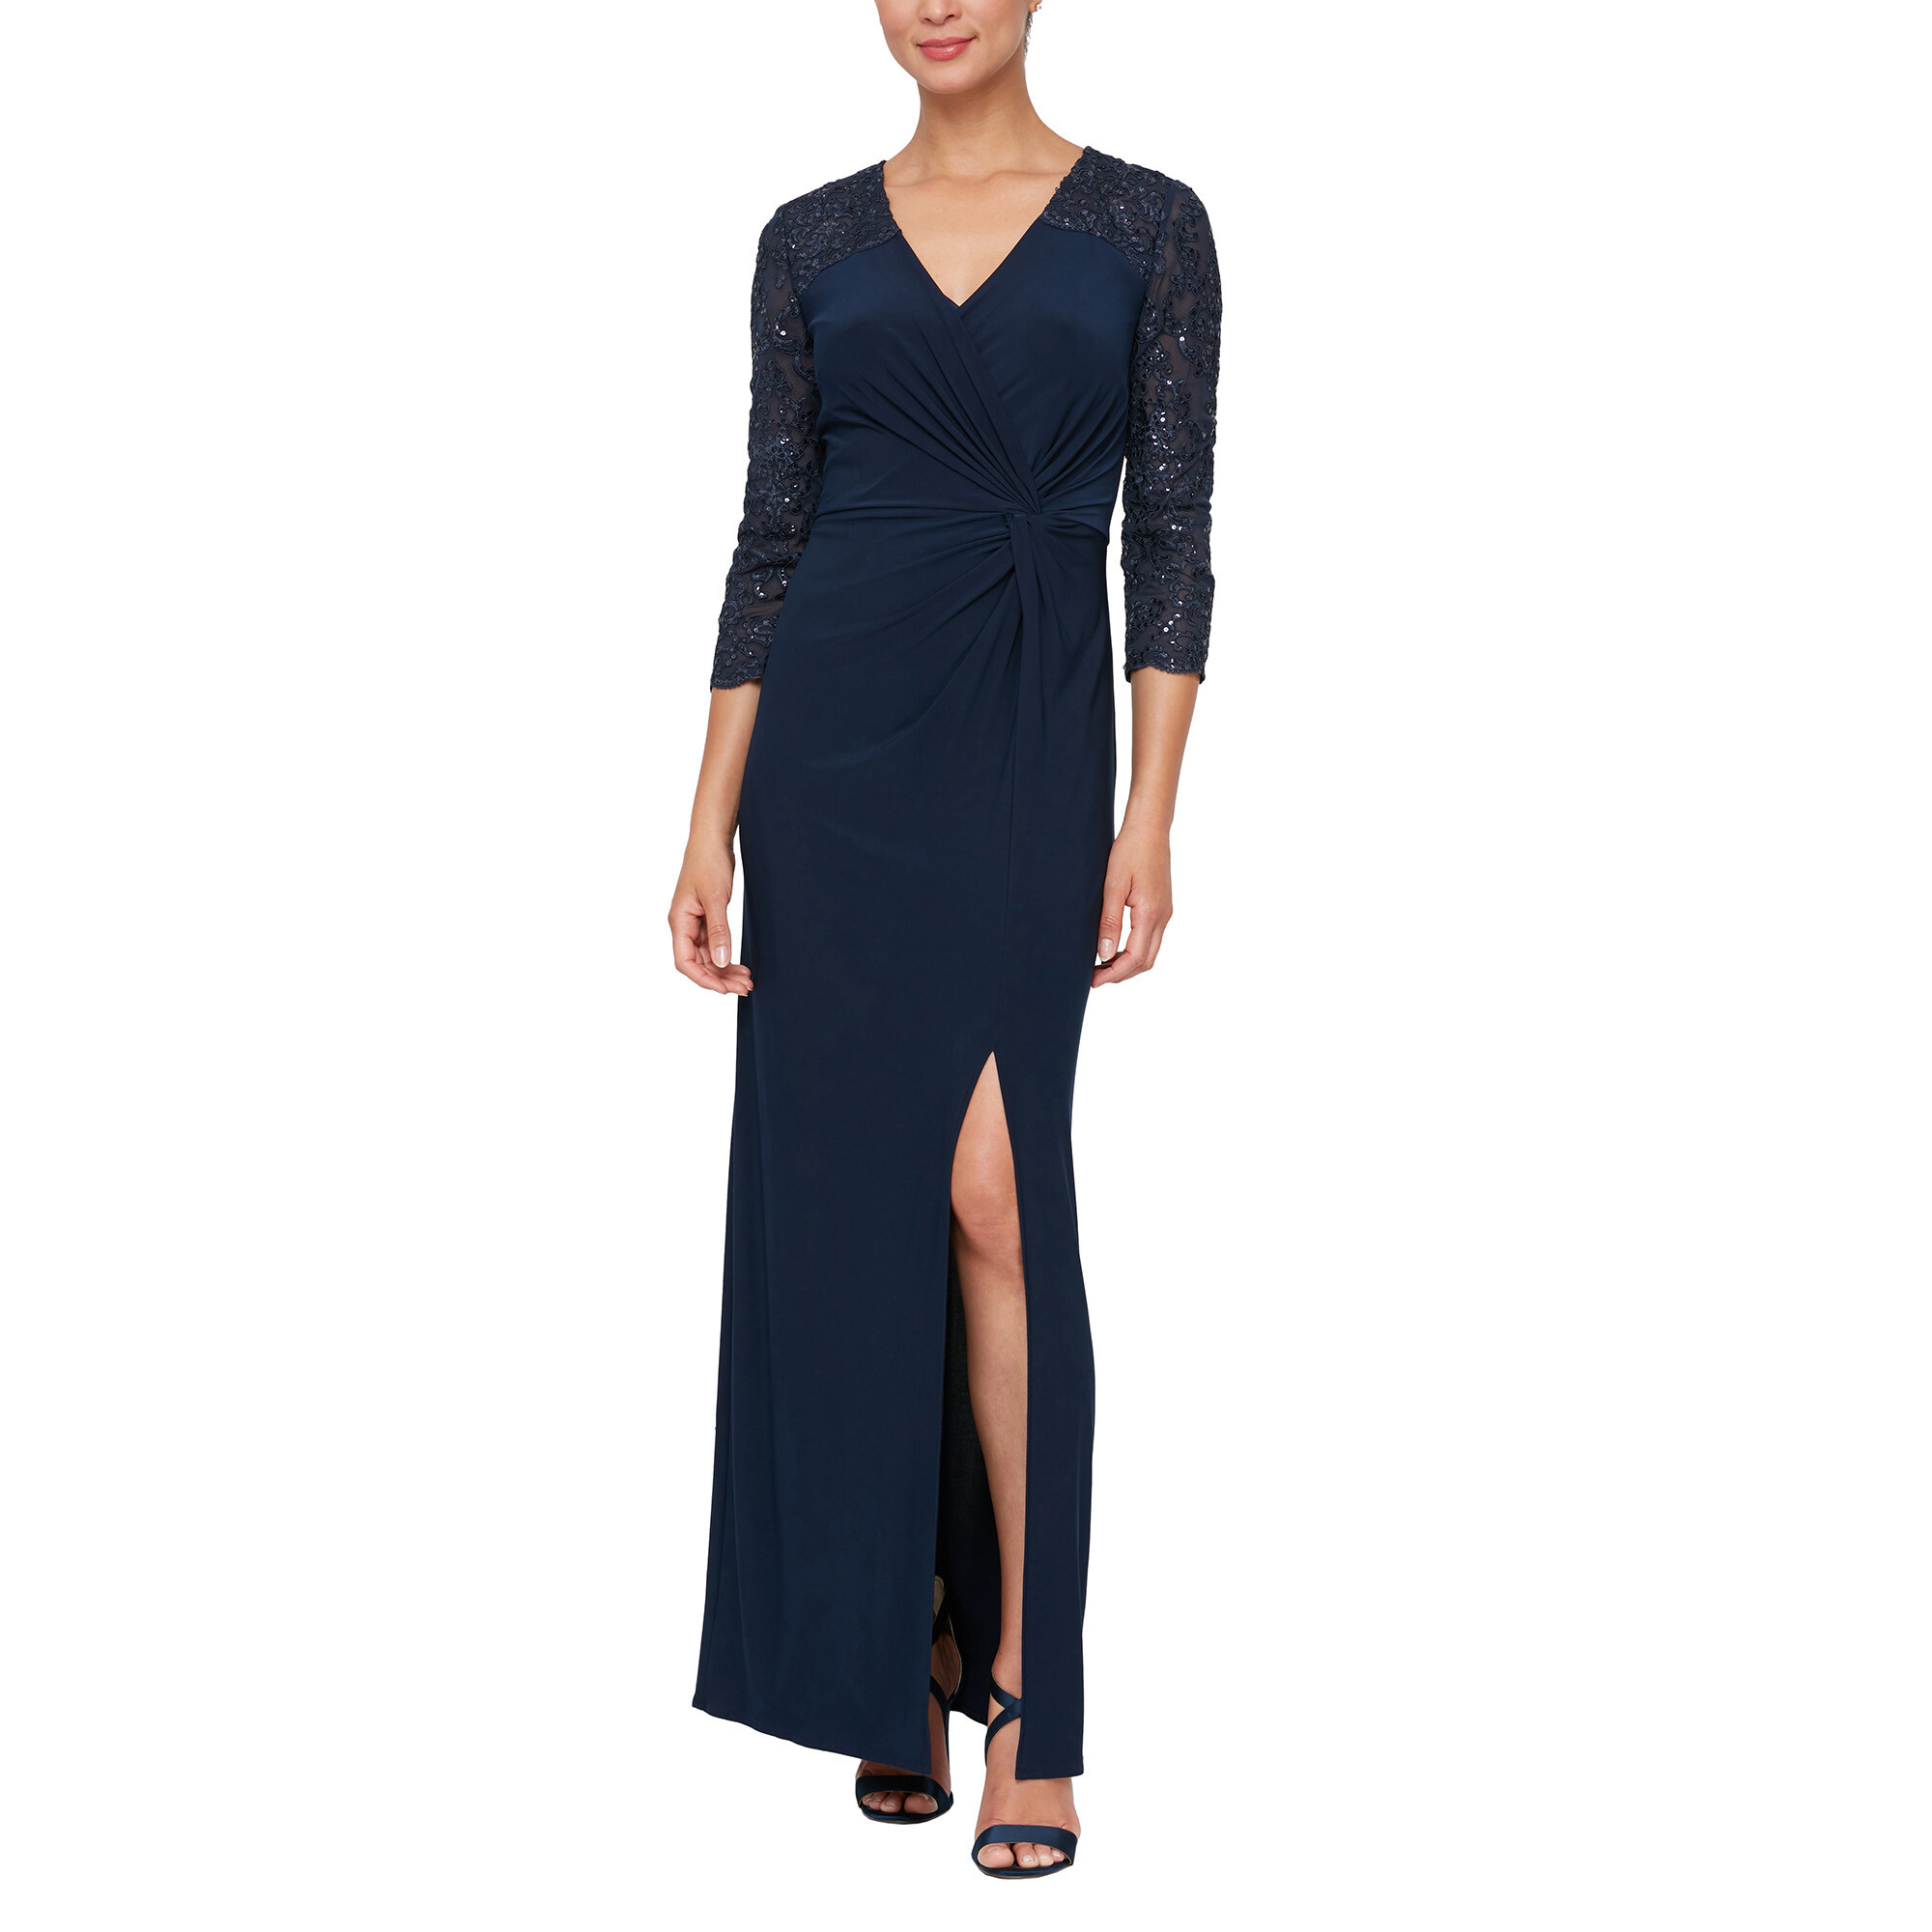 Imbracaminte Femei Alex Evenings Long Surplice Neckline Dress w Knot Front Embroidered Illusion Sleeves Navy